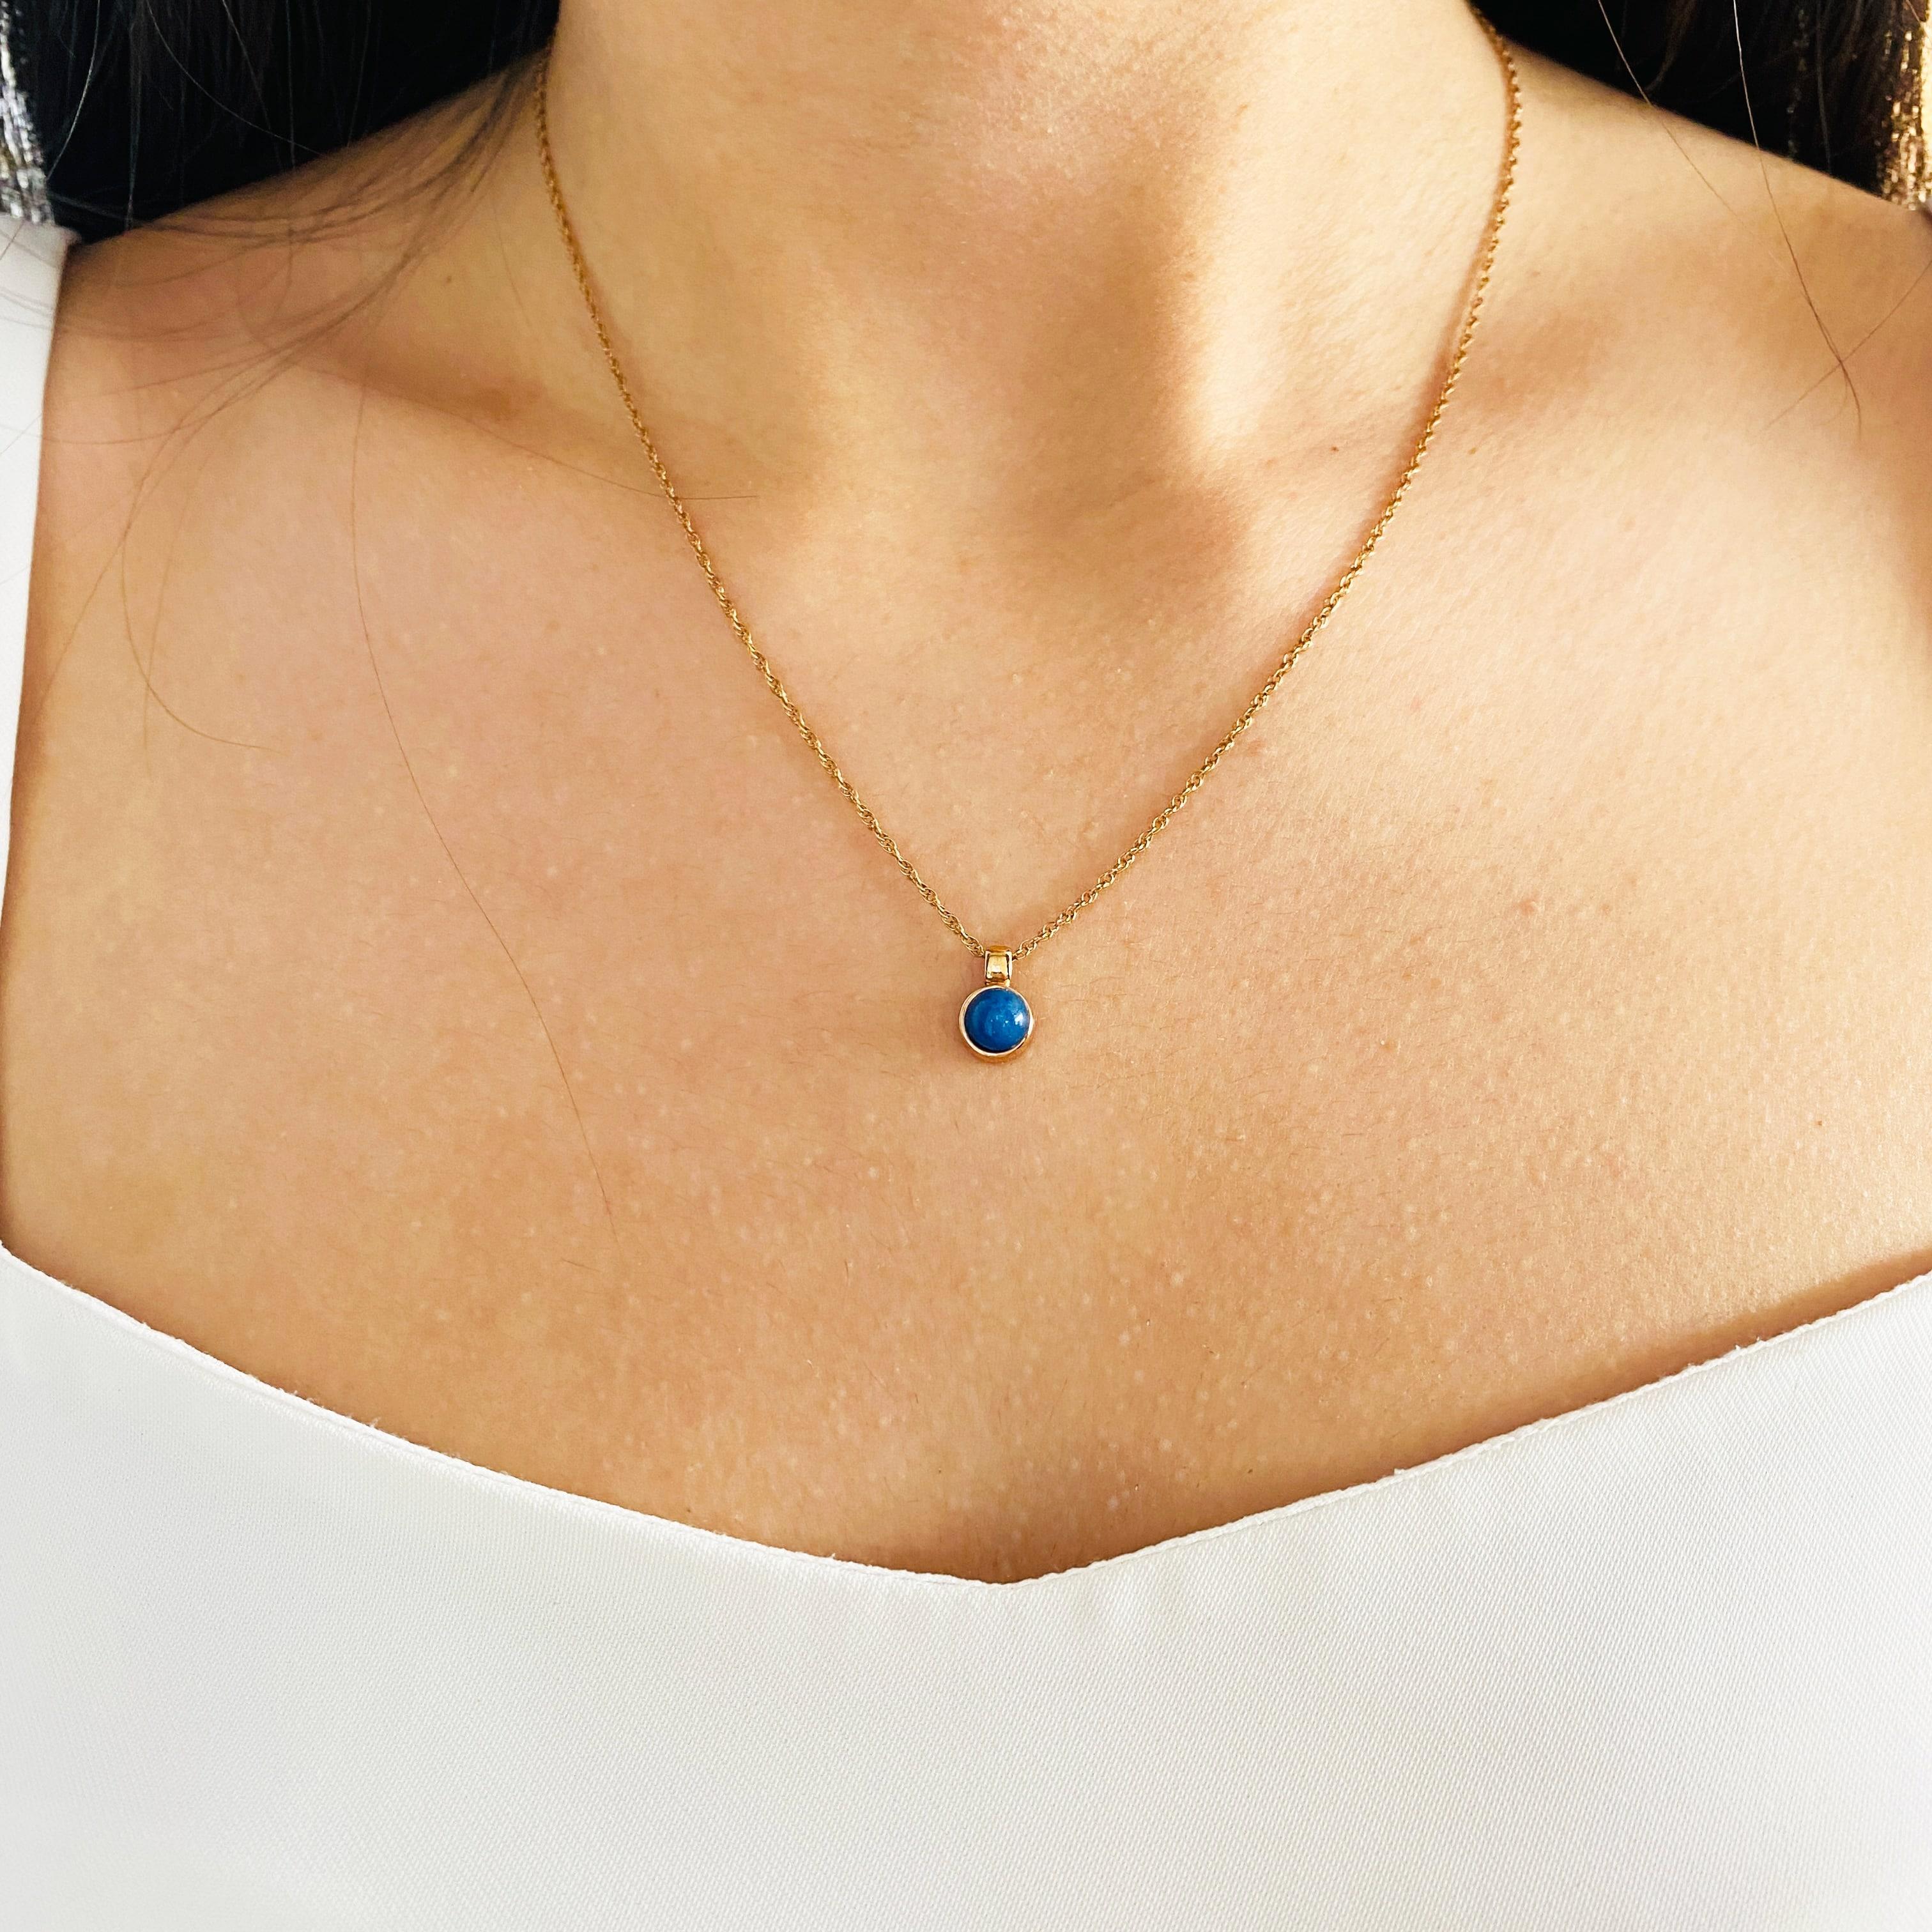 This beautiful petite pendant has a rich blue lapis lazuli dome set in rose gold! There is a wonderful pattern of sparkles amidst the deep blues of the stone that our photos can't quite capture! The rich texture of this lovely little beauty is